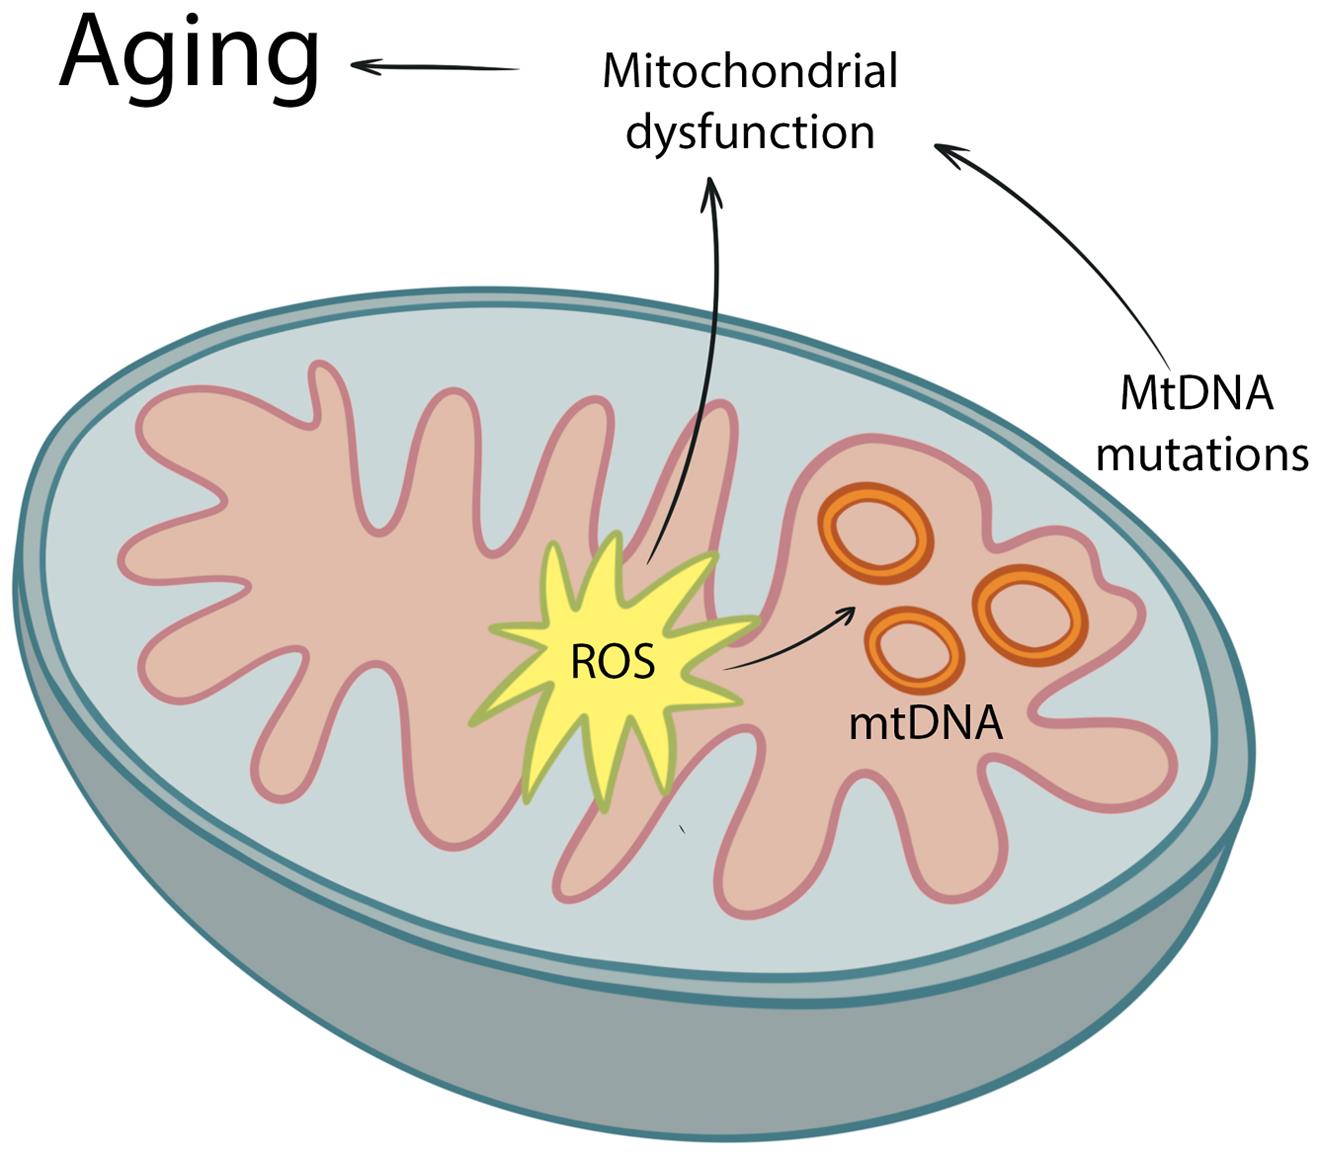 Mitochondrial DNA Damage Can Promote Atherosclerosis Independently